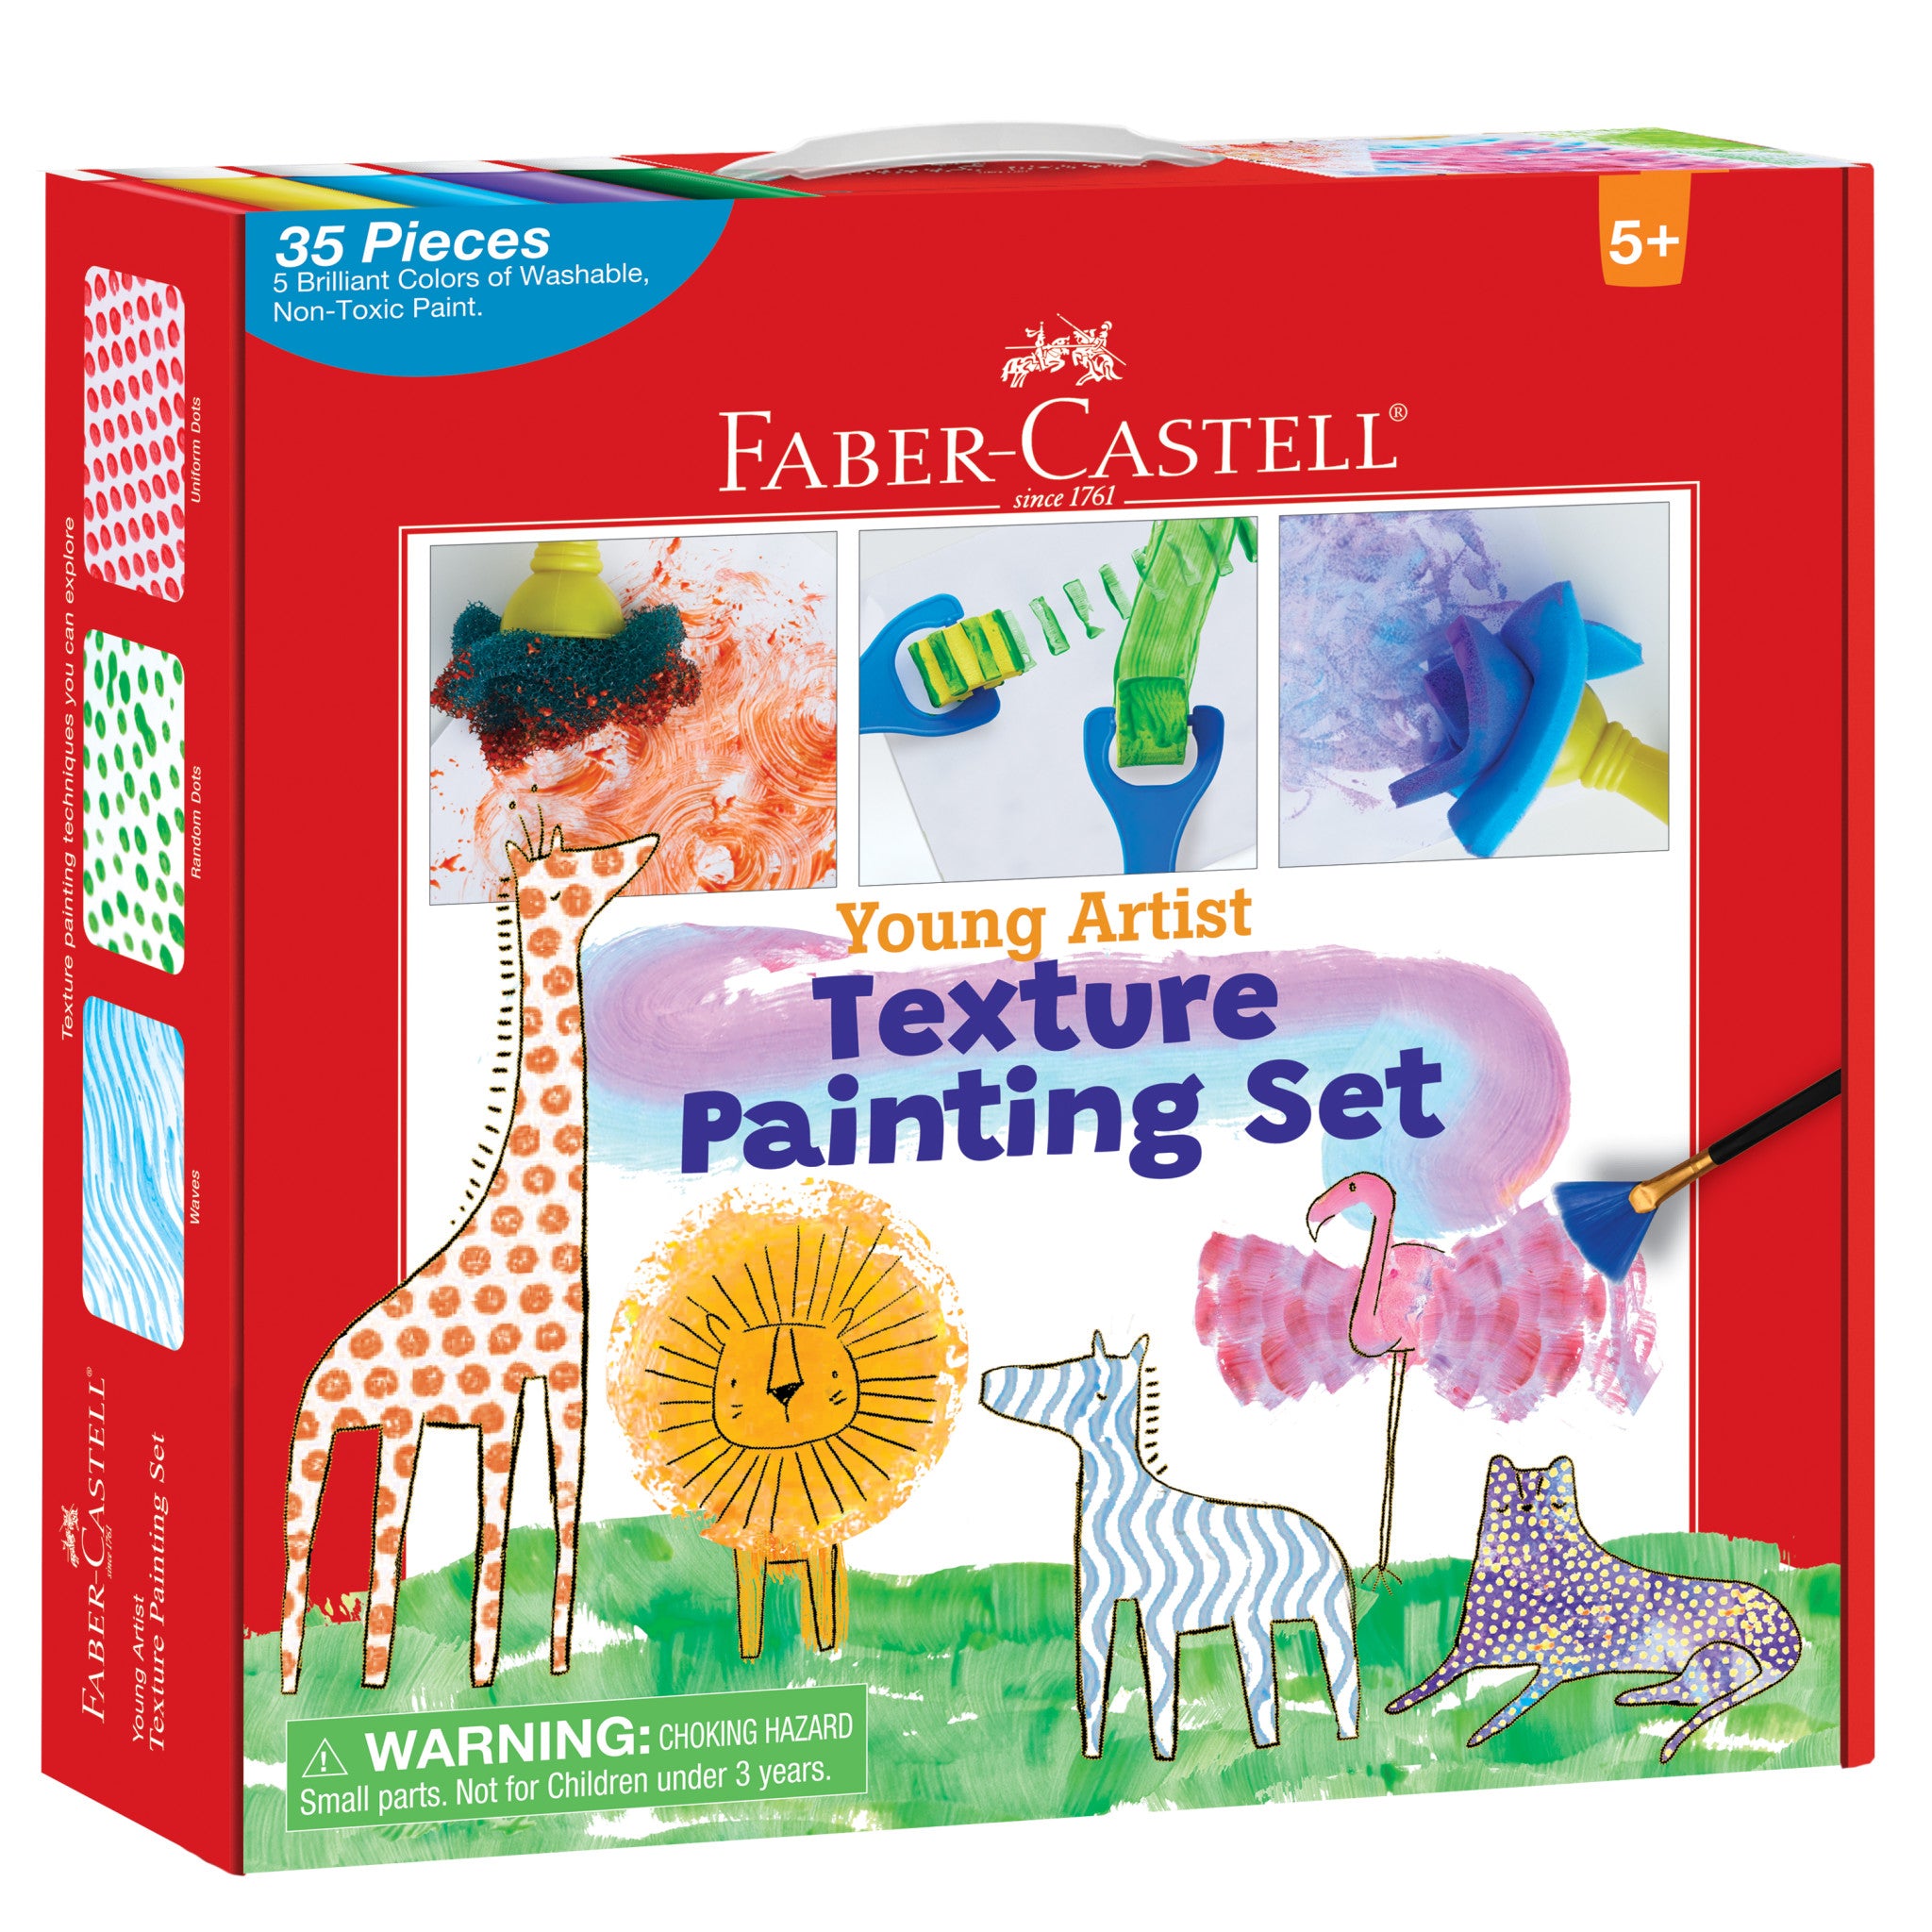 Ready 2 Learn Textured Art Tools, Set 2, Set of 4